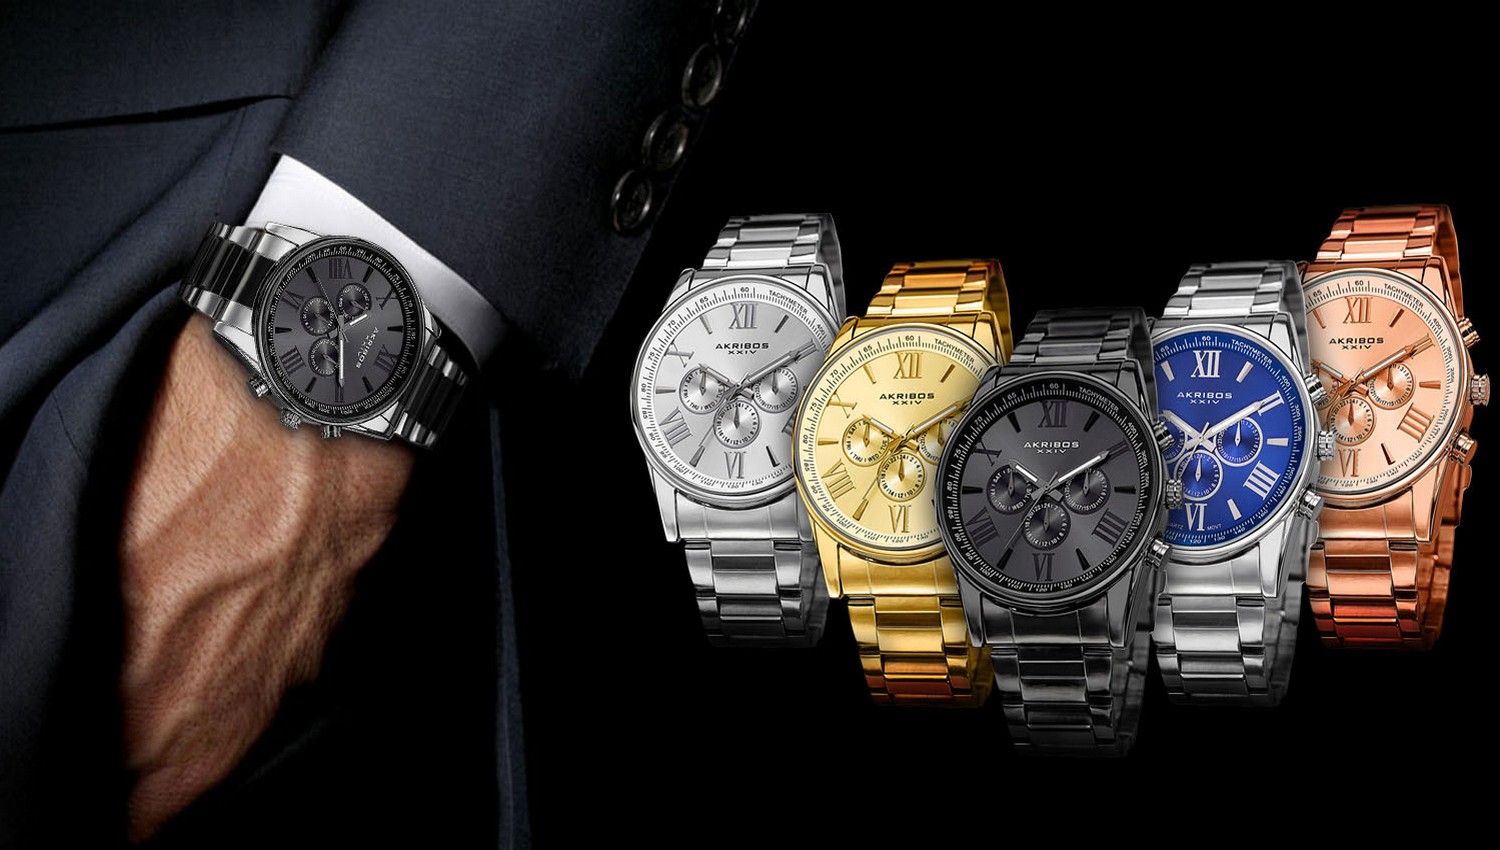 Buy Luxury collection of wrist watches, chronograph watches, smartwatches, and leather straps